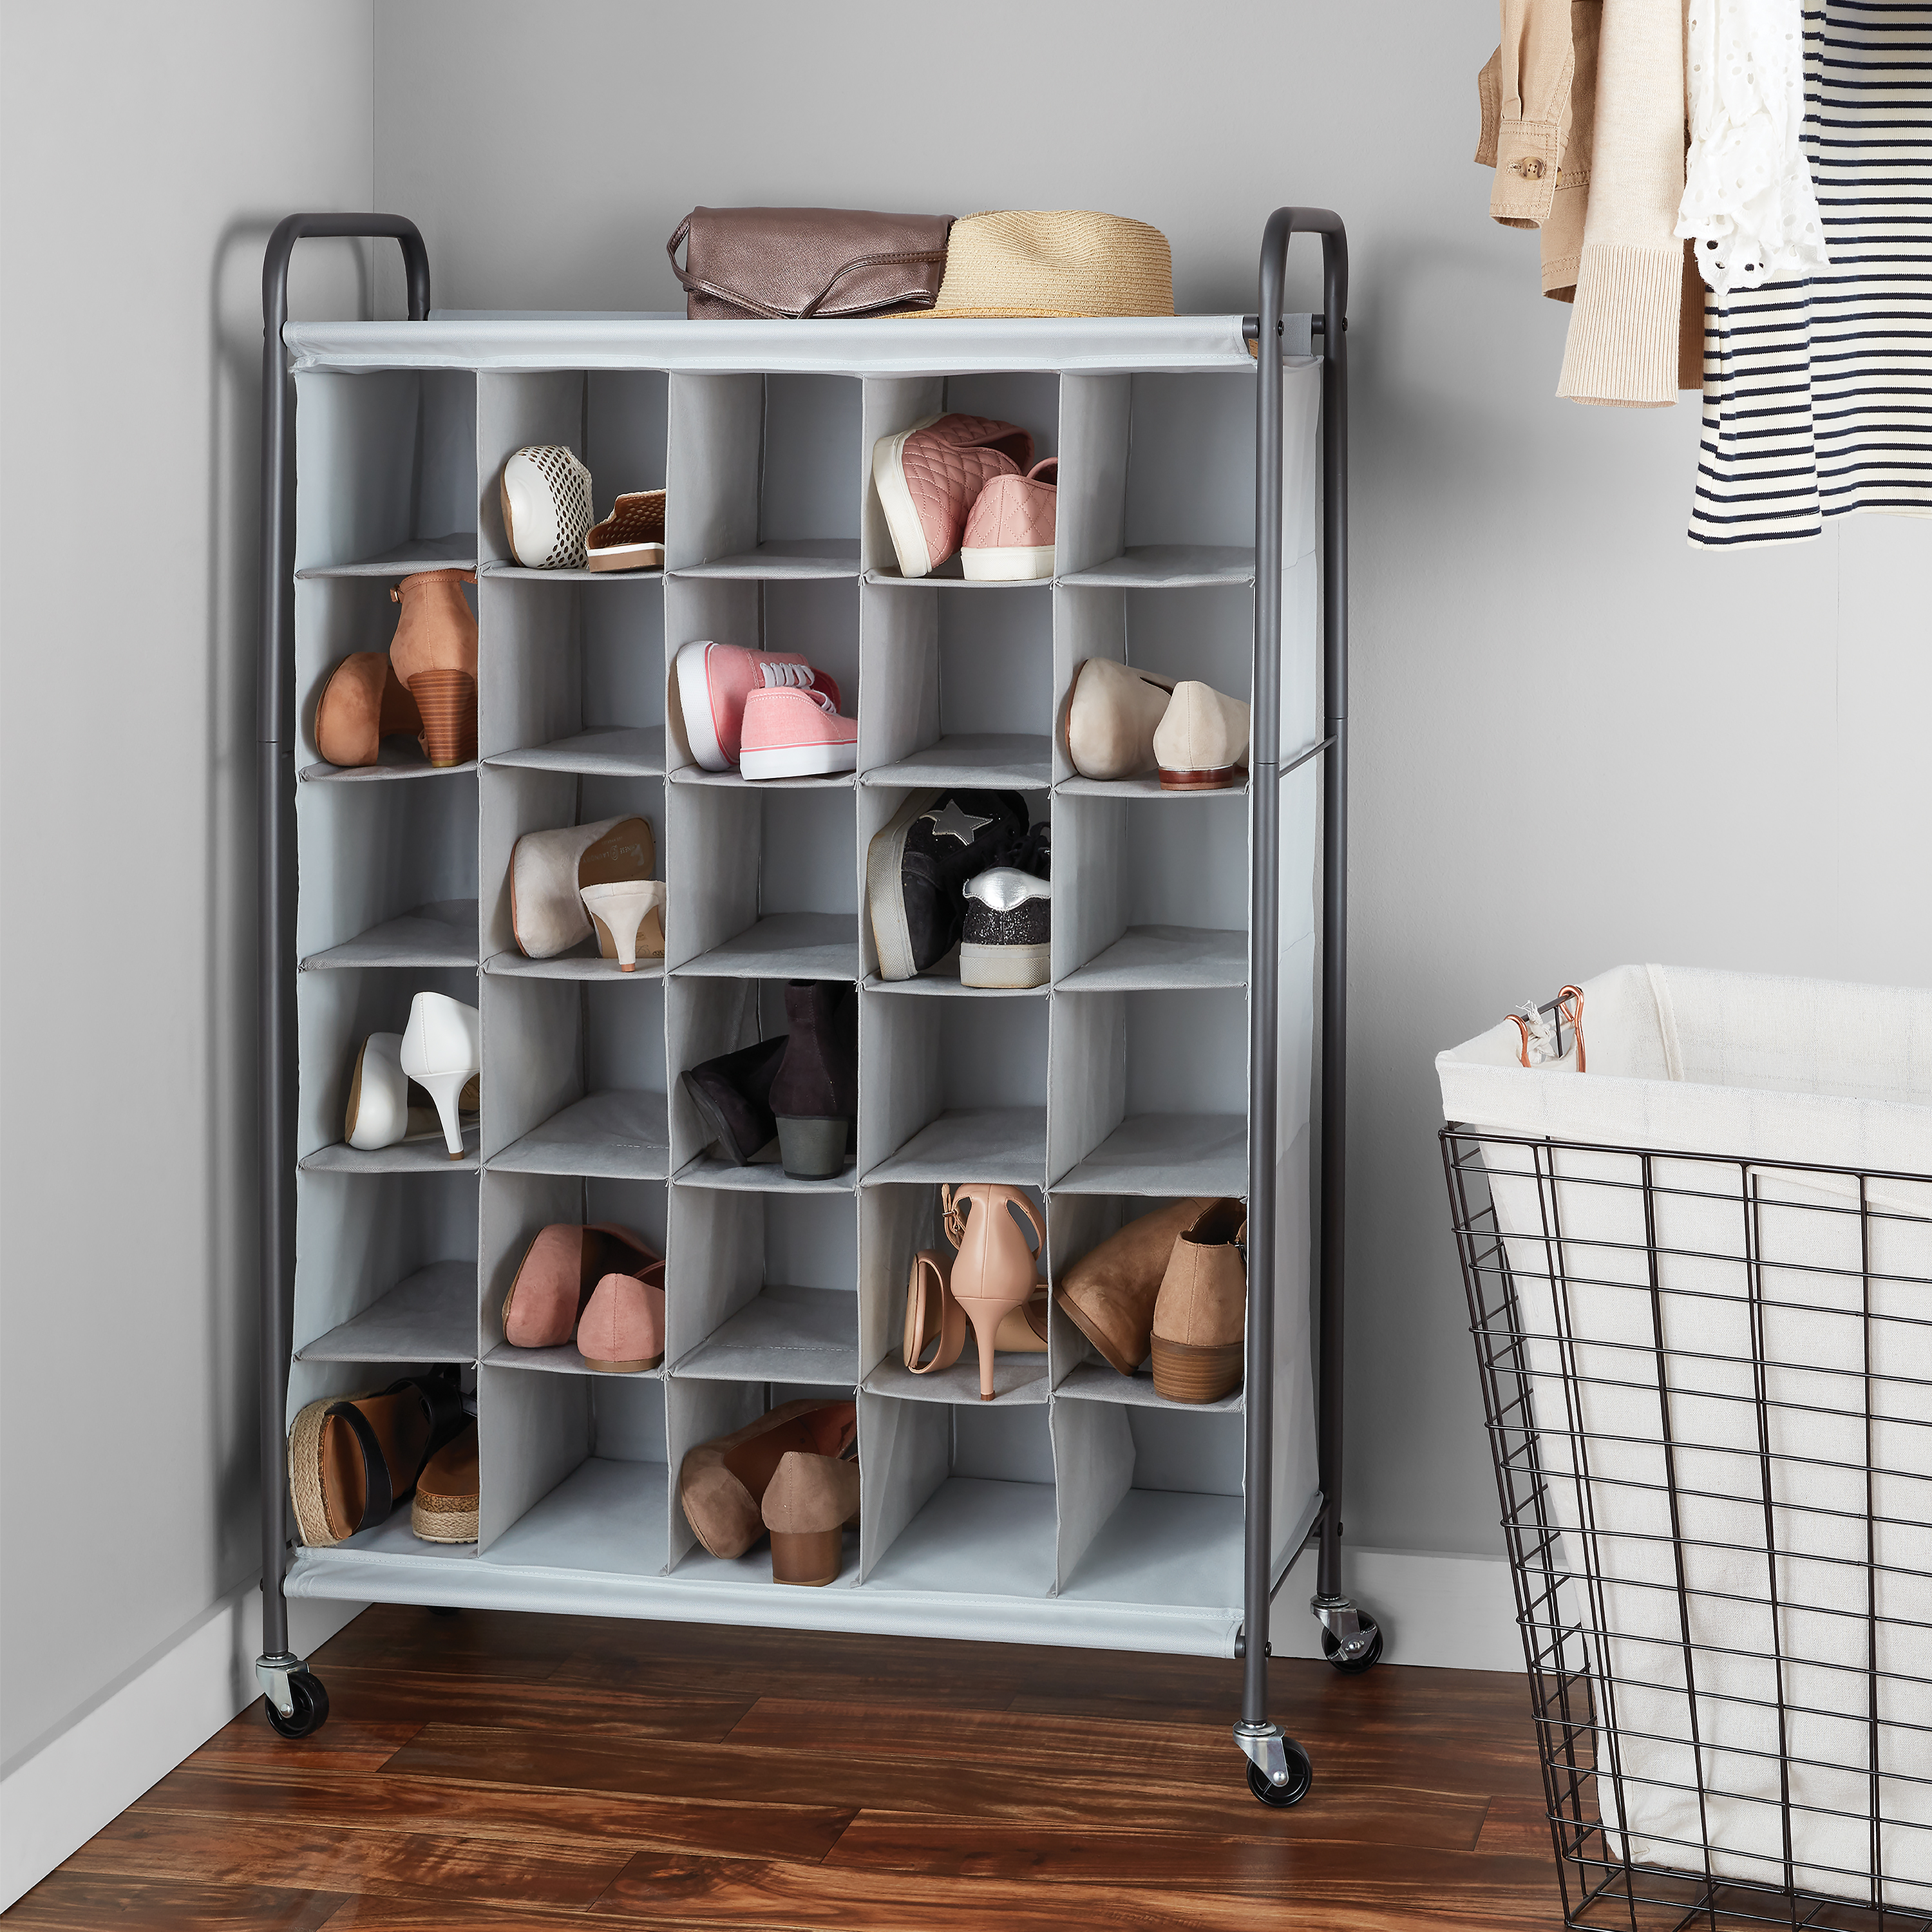 Mainstays 6 Tiers 30-Compartment Shoe Organizer, Gray - image 1 of 6